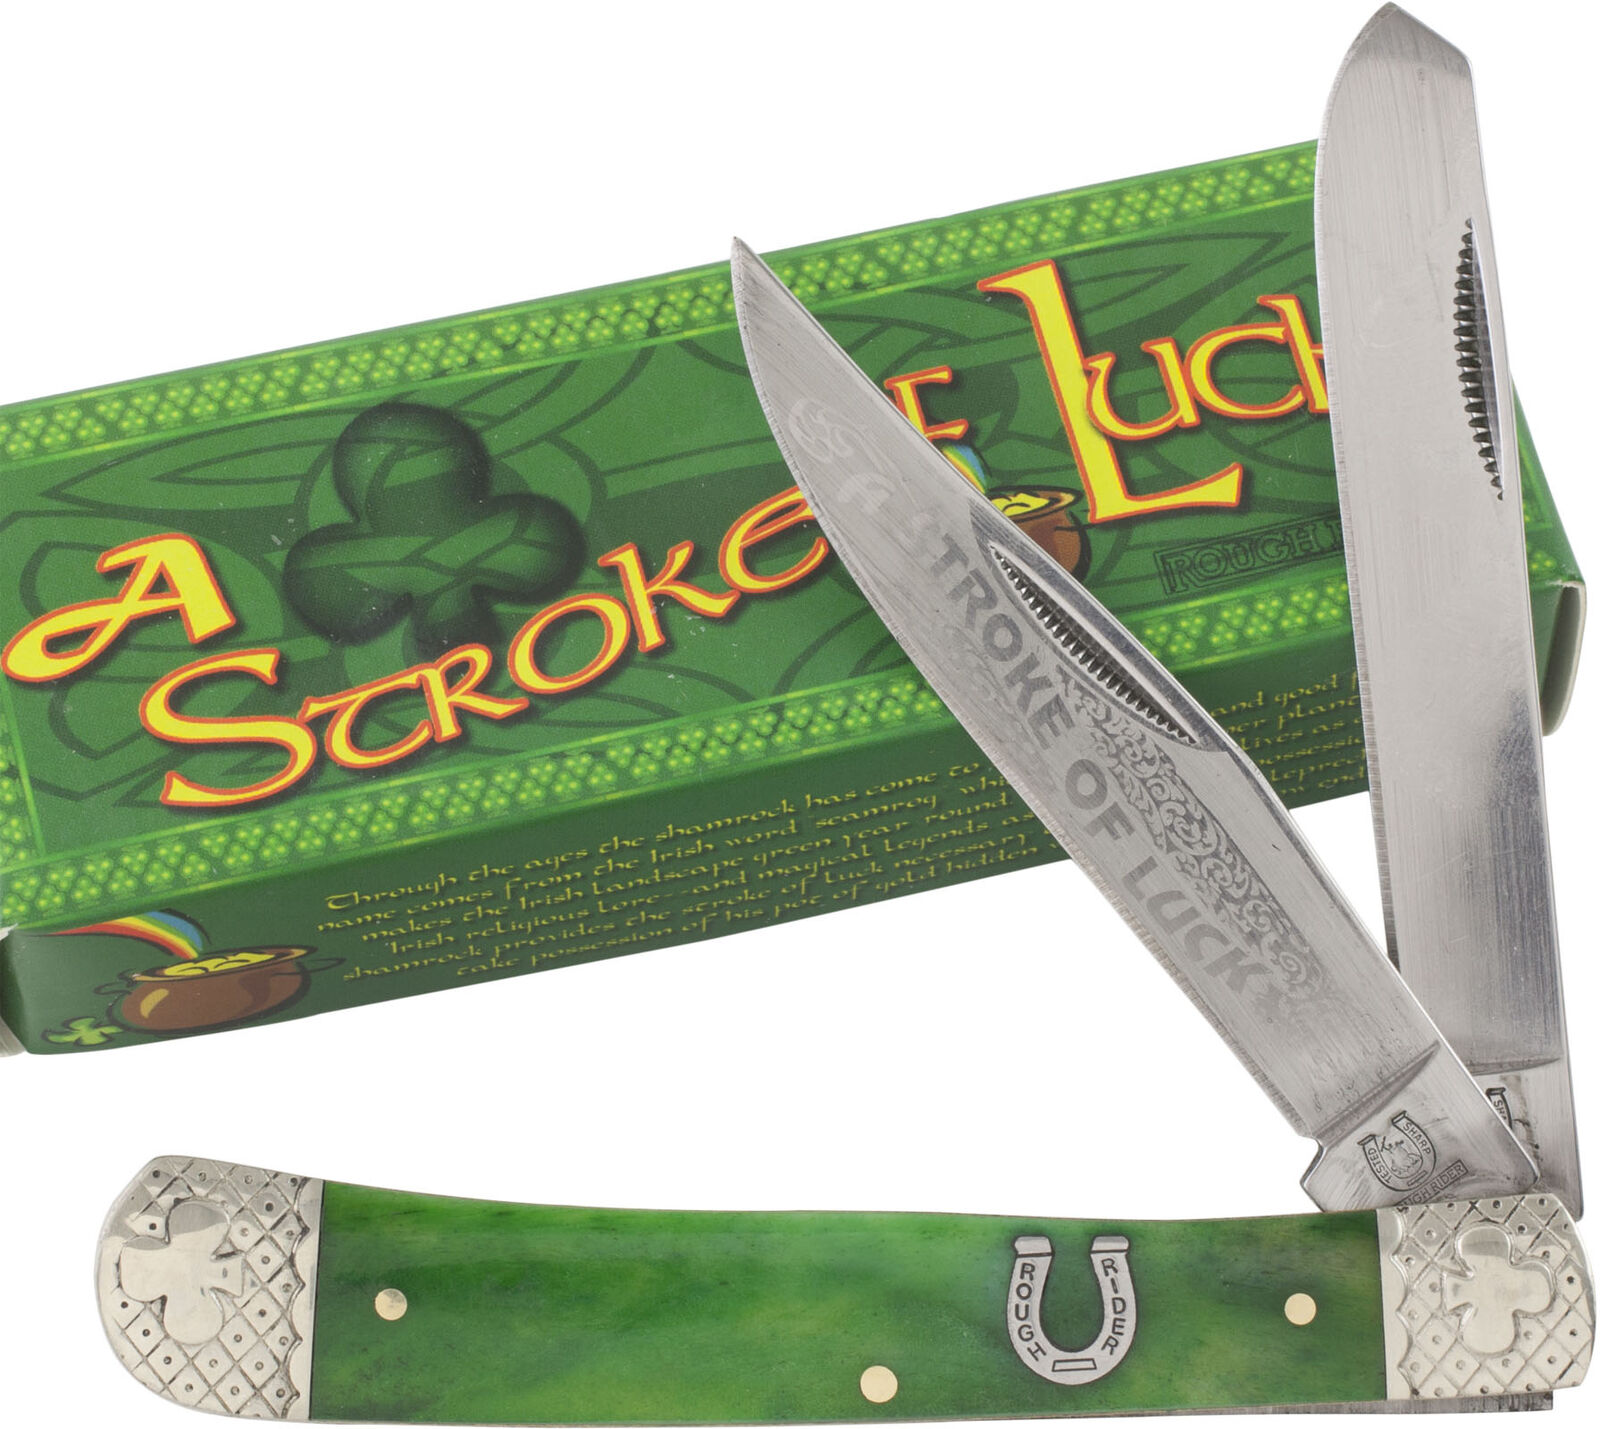 Rough Rider Green Smooth Stroke of Luck Trapper Pocket Knife RR1056